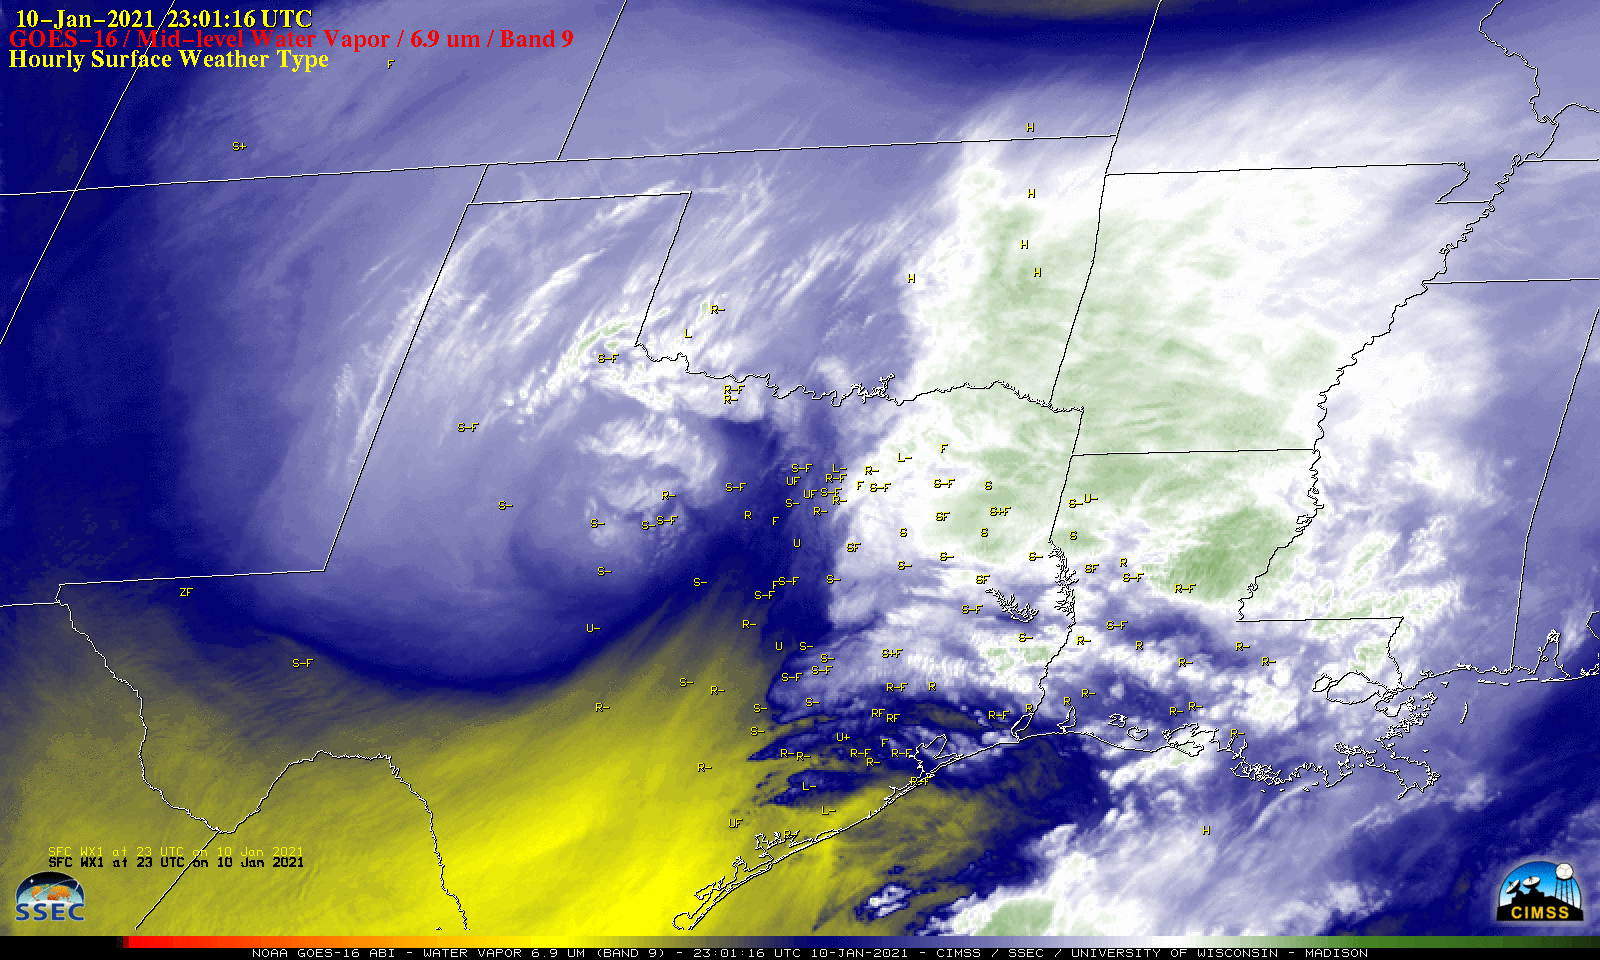 GOES-16 Mid-level Water Vapor (6.9 µm) images, with hourly surface weather type plotted in yellow [click to play animation | MP4]